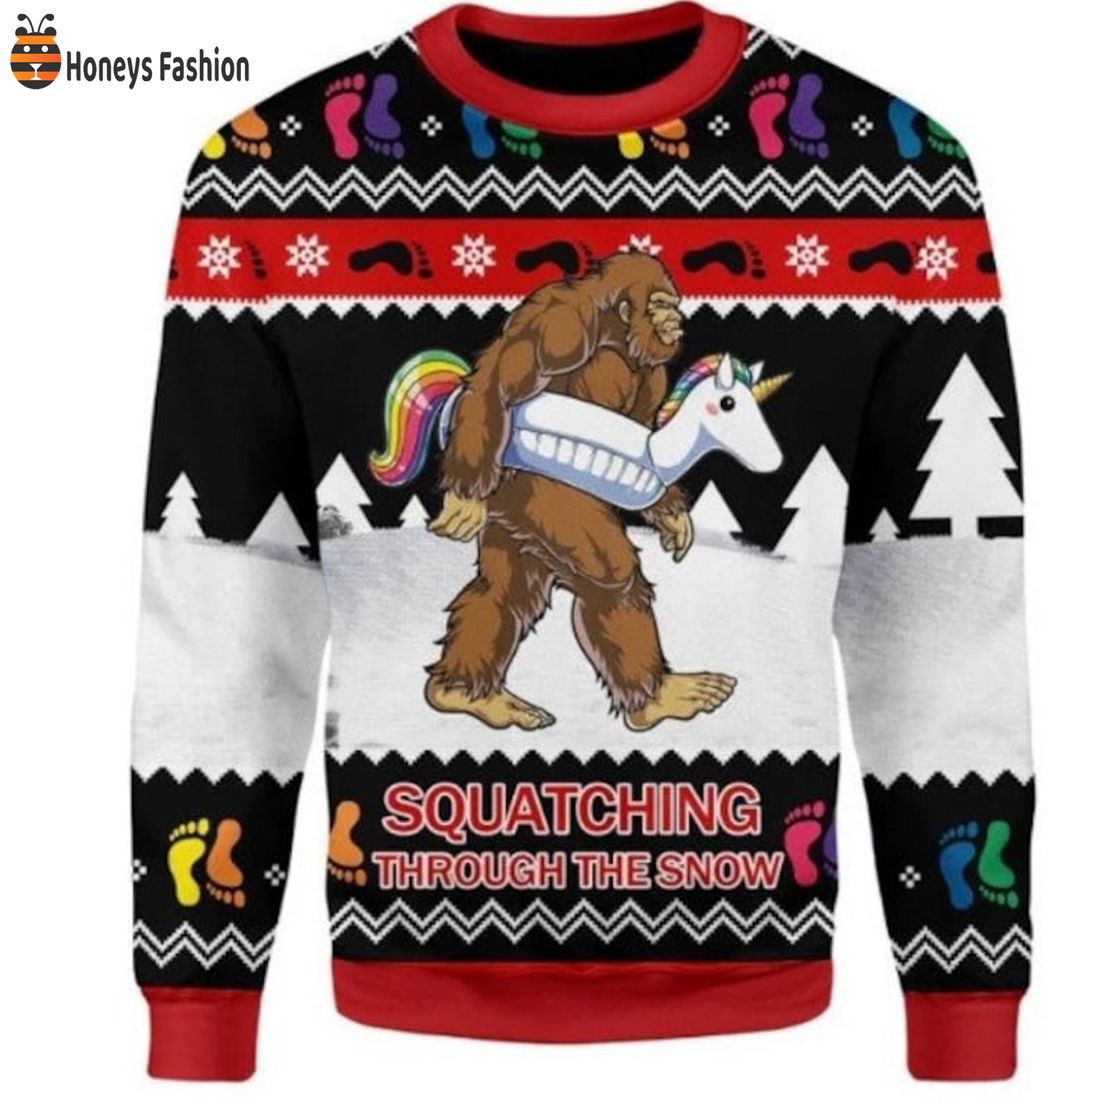 PRODUCT BigFoot Squatching Through The Snow Unicorn Christmas Ugly Sweater